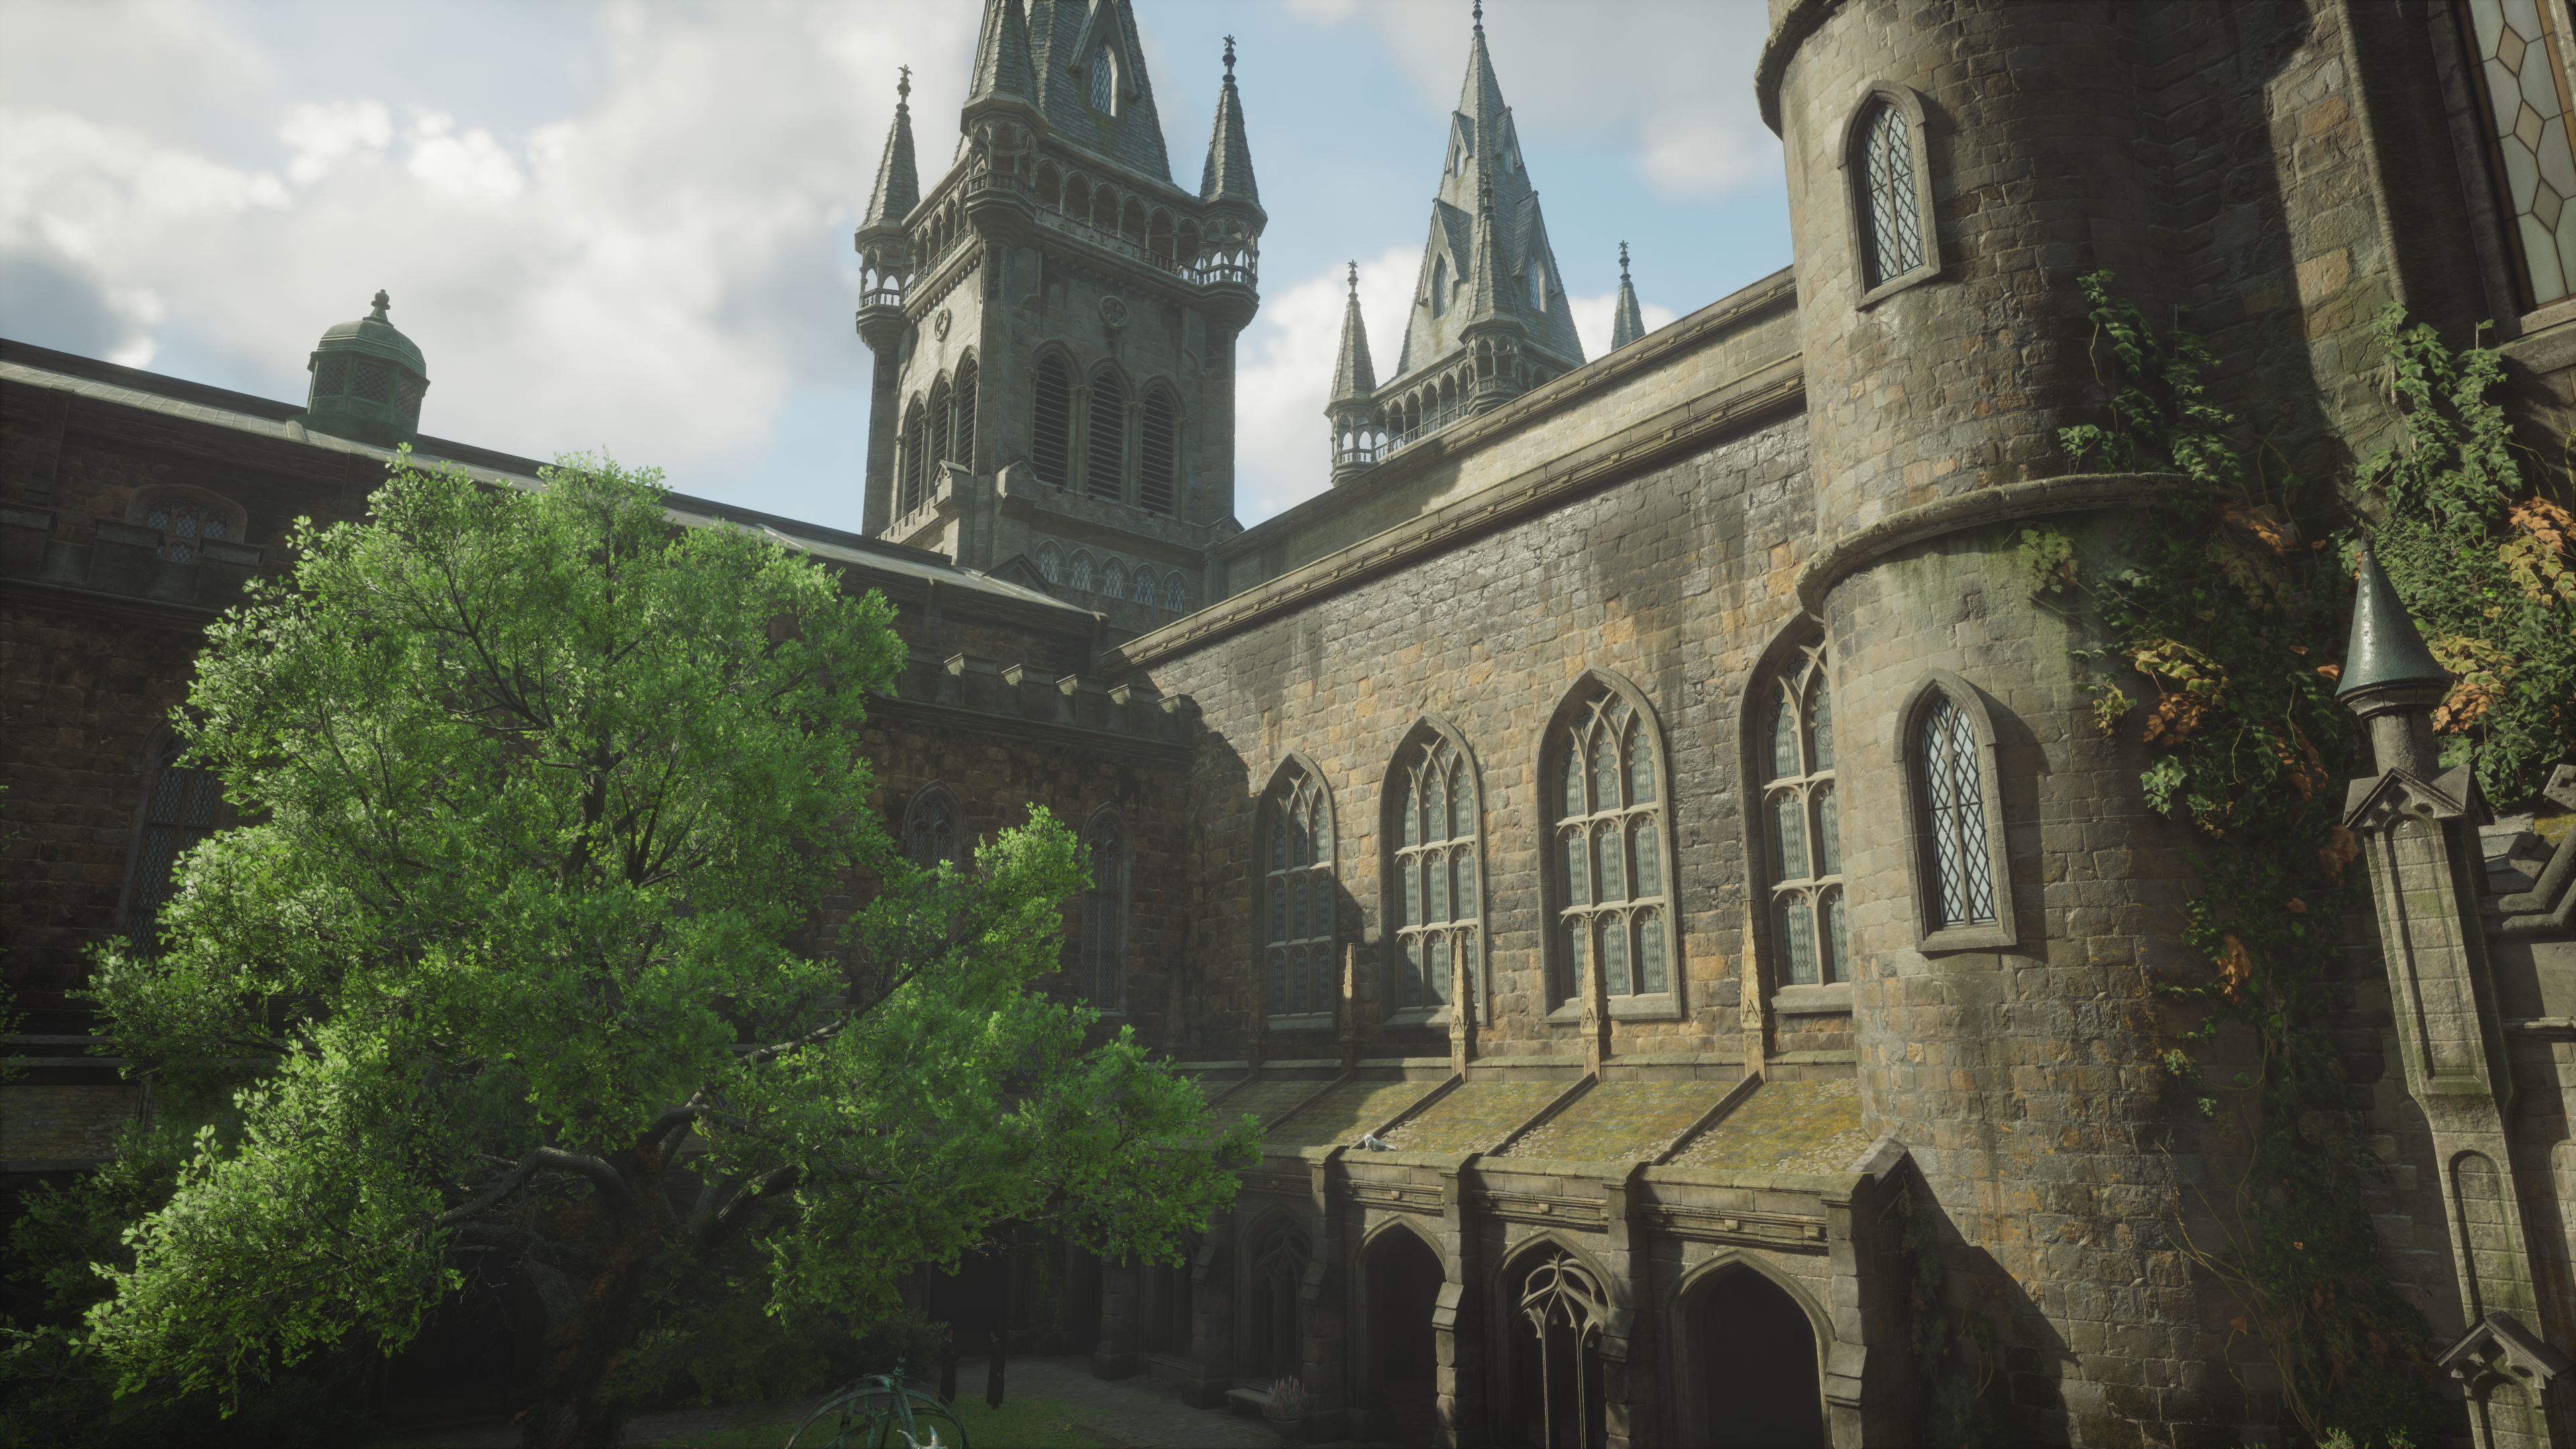 Nvidia RTX Hogwarts Legacy Video Games CGi Video Game Art Building Trees Architecture Sky Clouds Ava 3840x2160